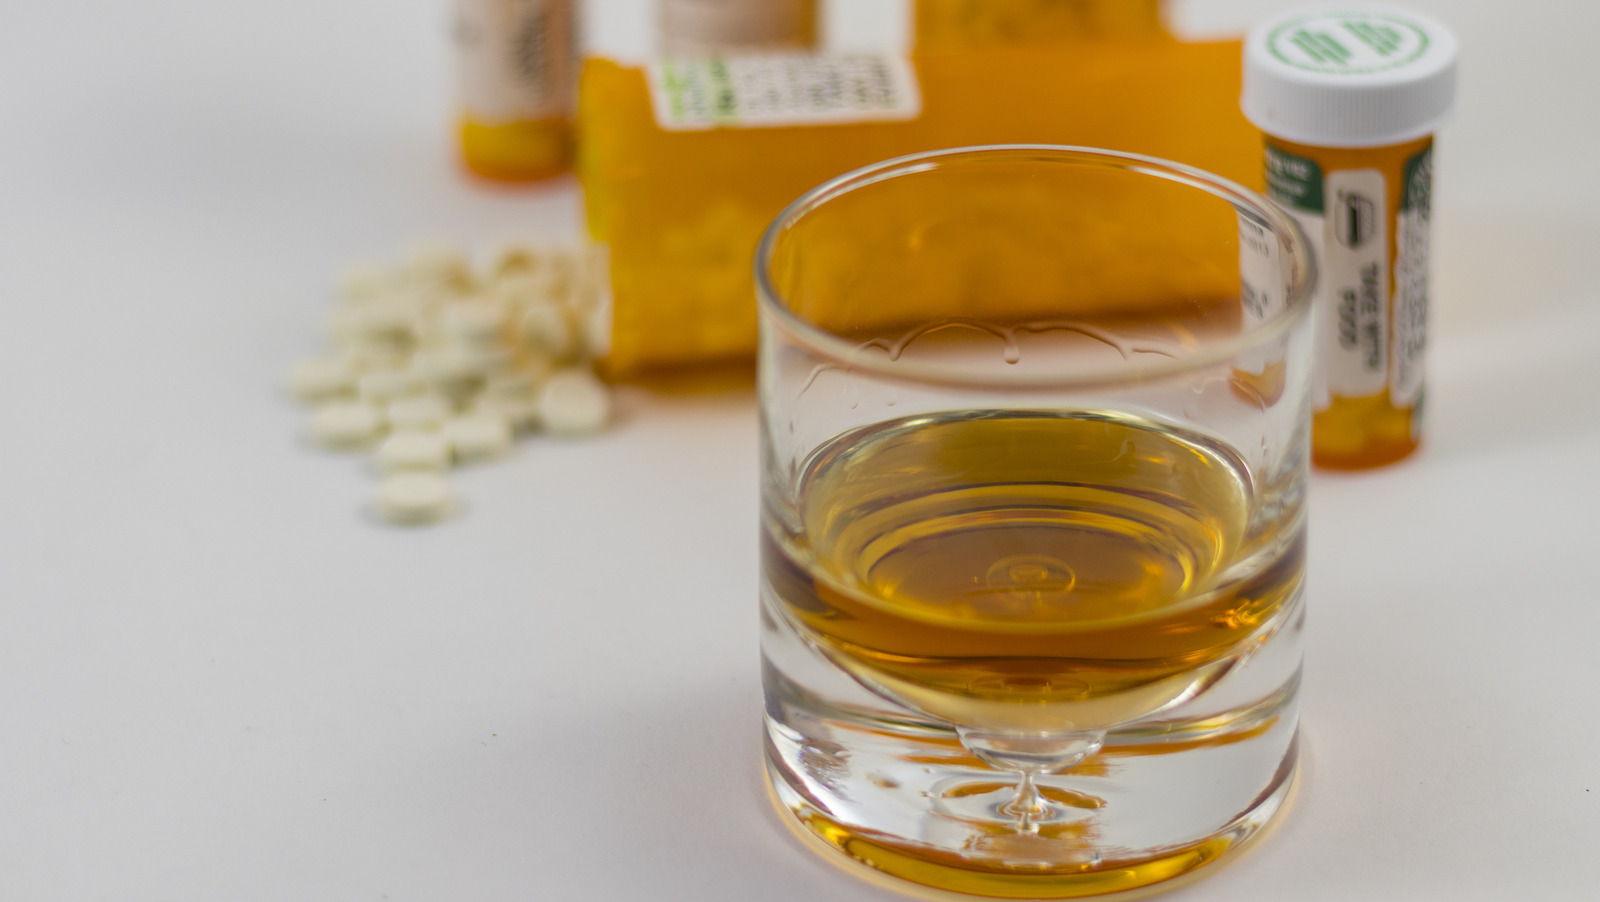 https://www.healthdigest.com/img/gallery/why-you-shouldnt-mix-muscle-relaxers-and-alcohol/l-intro-1643730415.jpg